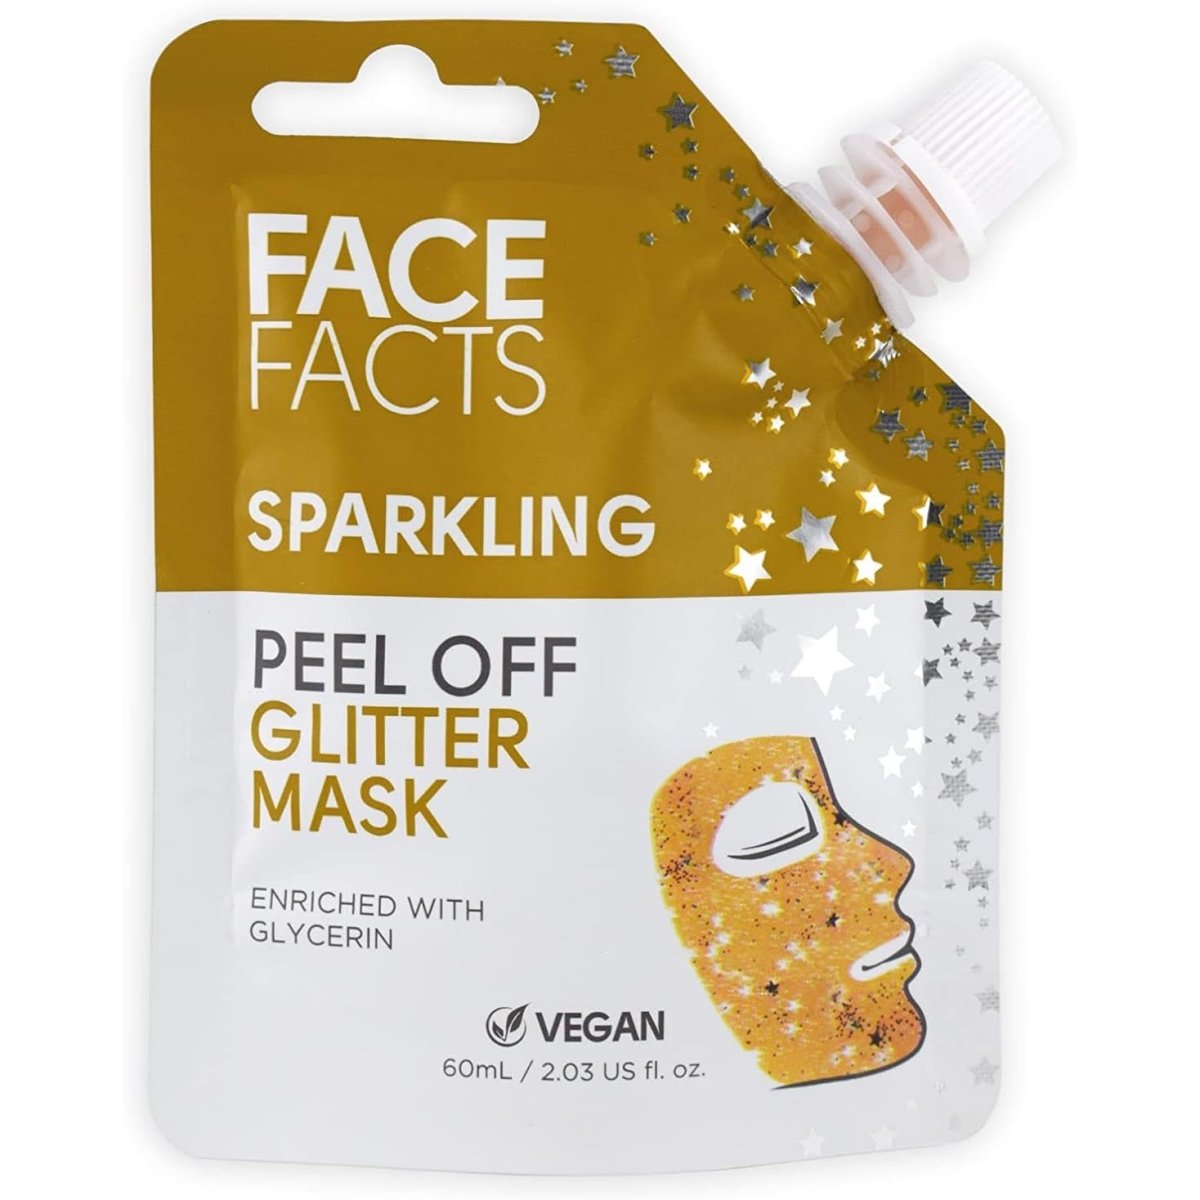 Face Facts Glitter Peel off Mask - Sparkling Gold, 5031413920215